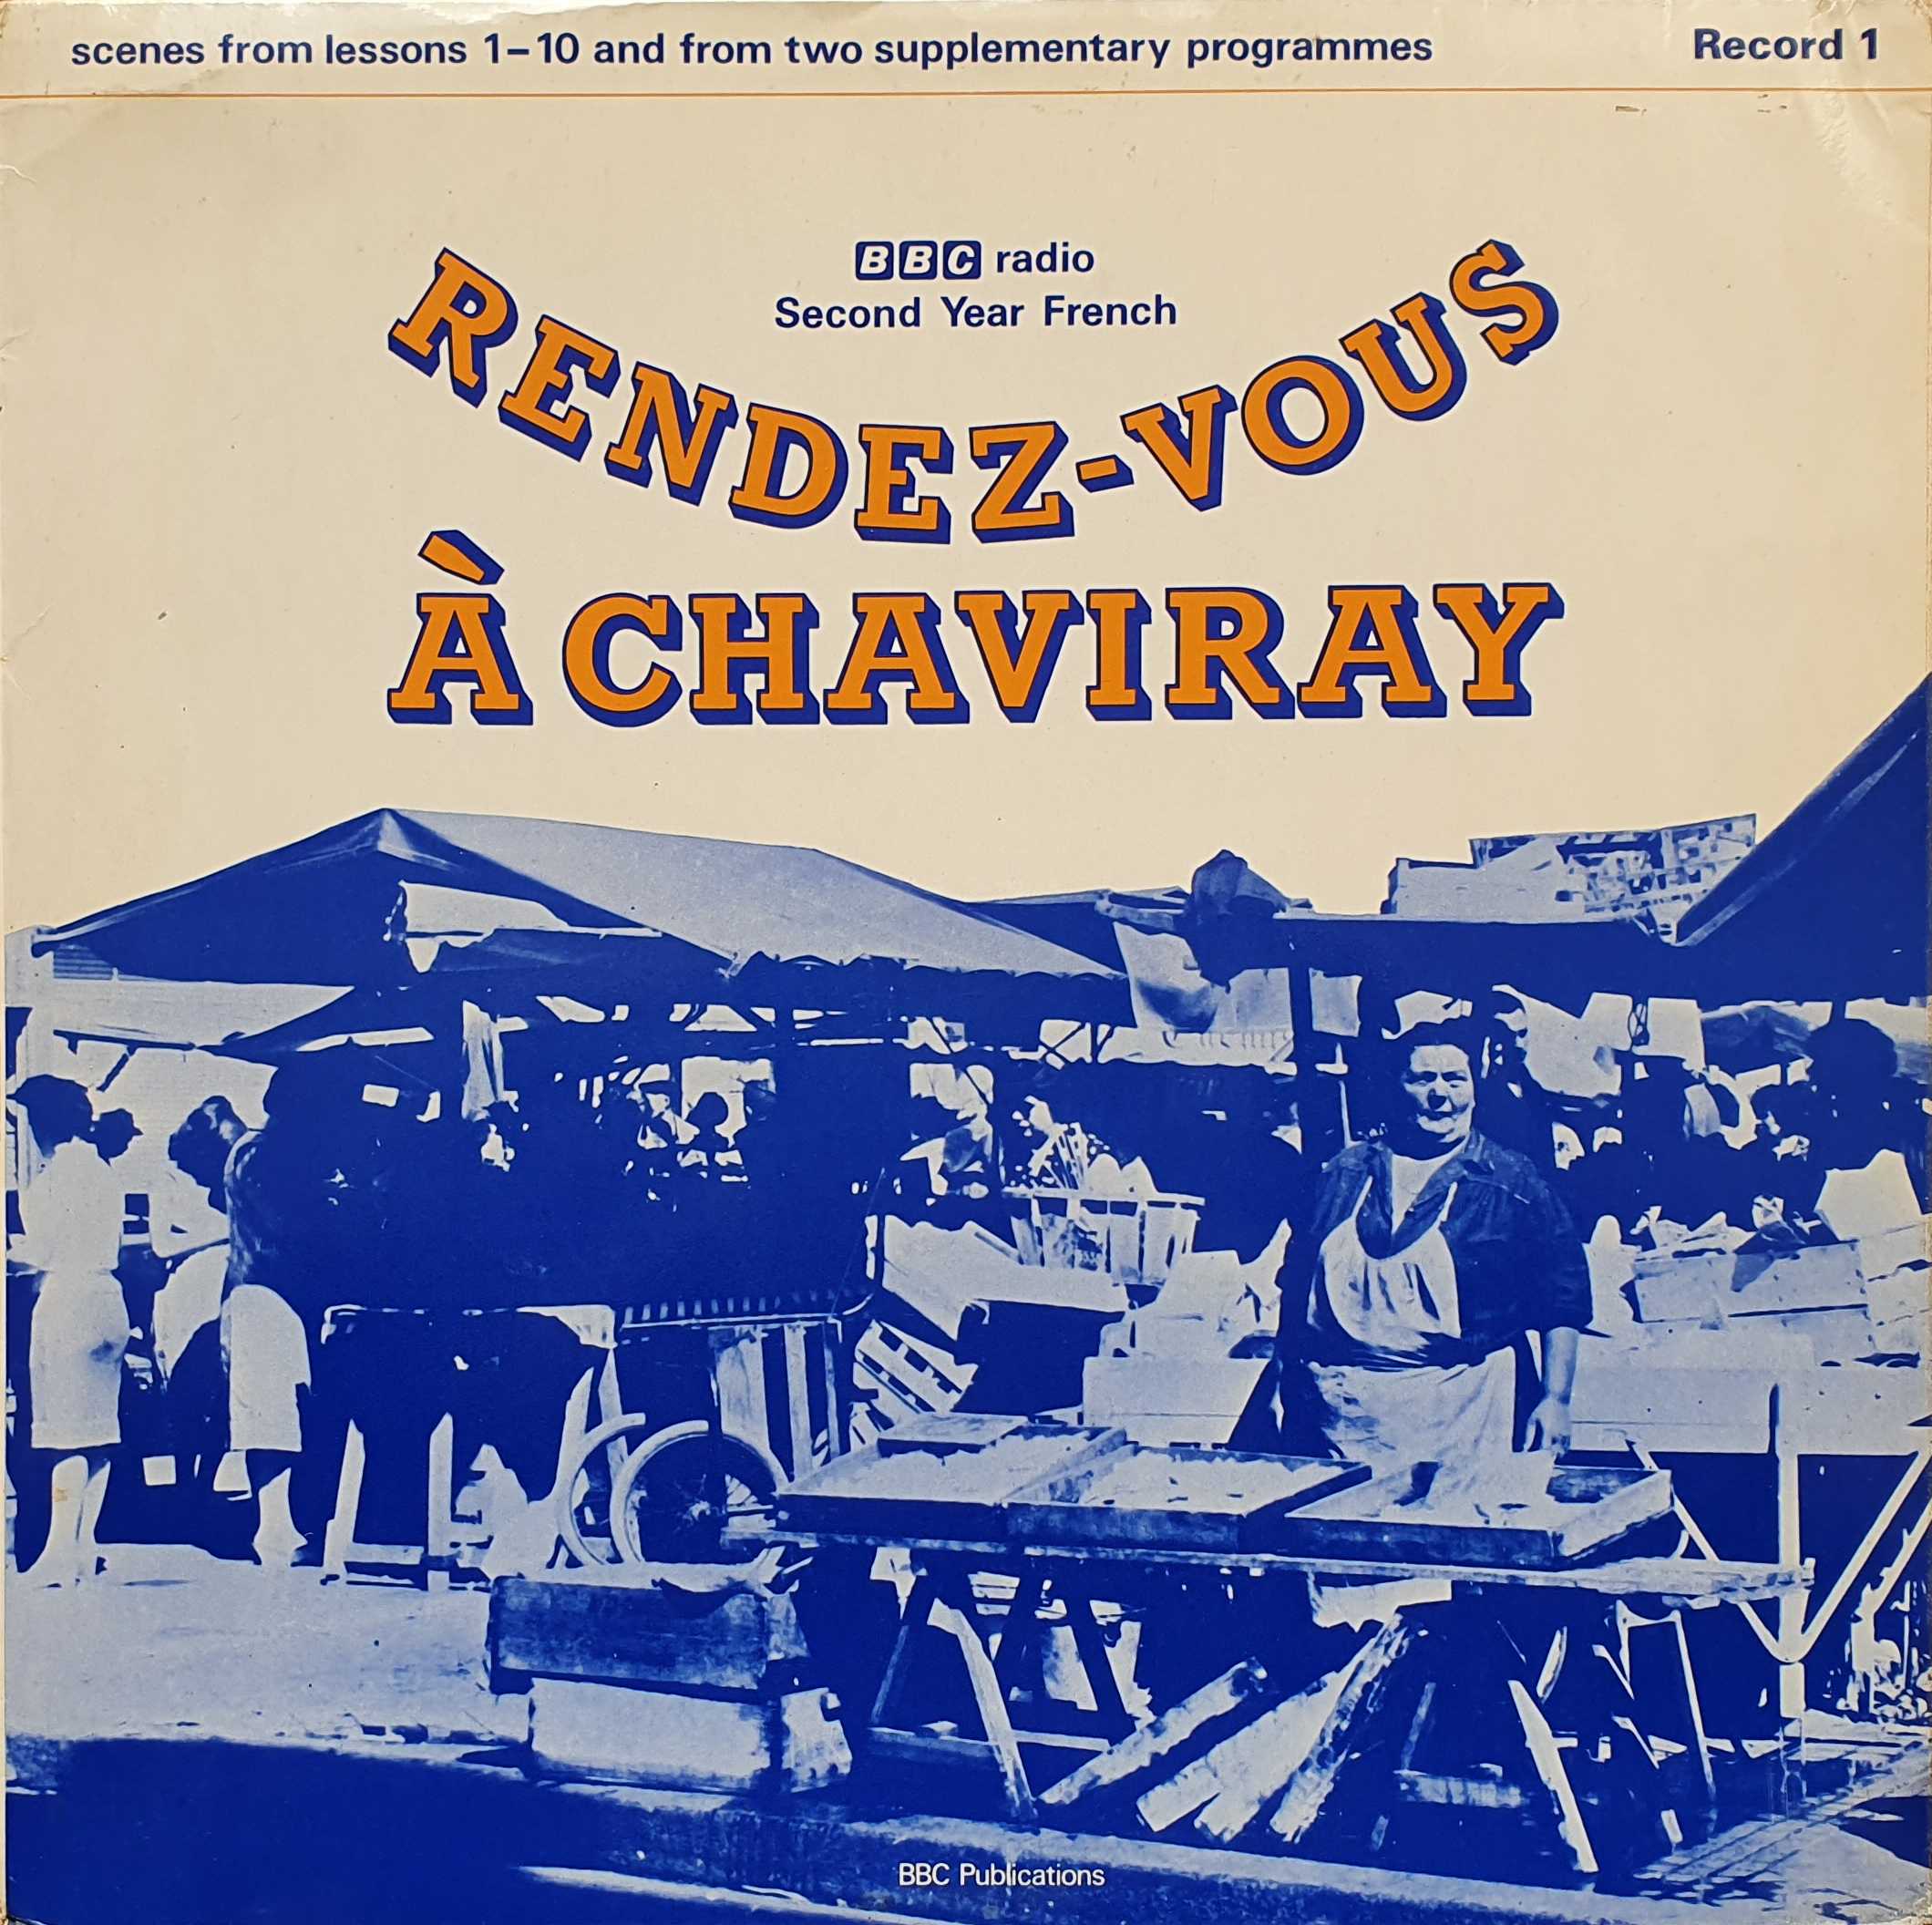 Picture of OP 185/186 Rendez-vous a Chaviray - BBC radio Second Year French - Record 1 - Lessons 1 - 10 by artist John Ross / Madeleine Le Cunff from the BBC albums - Records and Tapes library